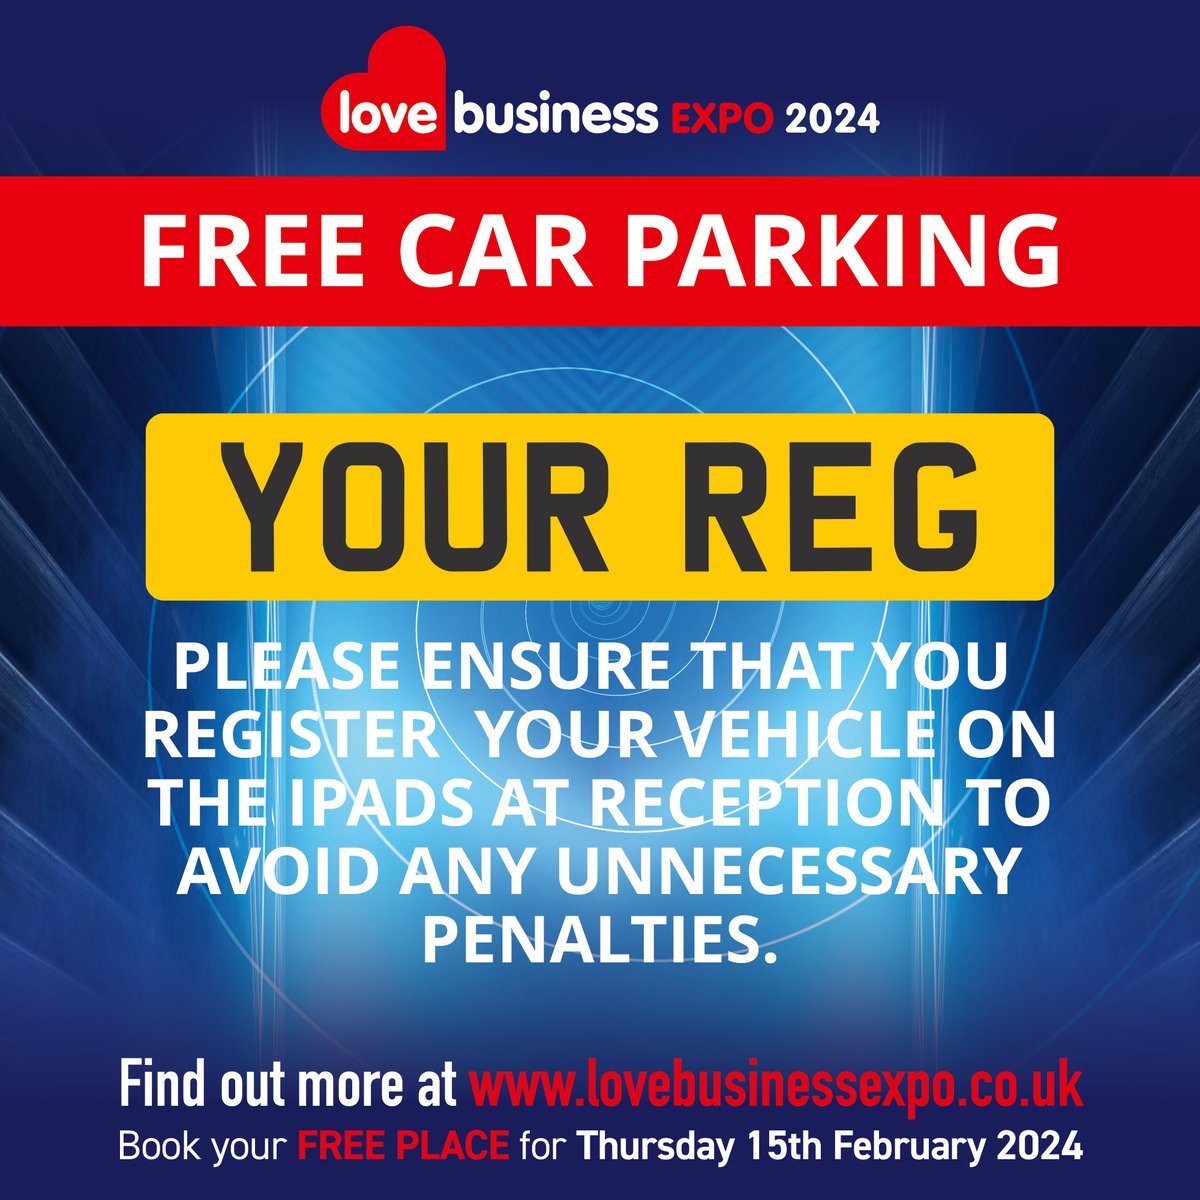 Parking for guests is free-of-charge at Love Business EXPO 2024. Please ensure that you register your vehicle on the iPads at Holywell Park Conference Centre reception to avoid any unnecessary penalties.